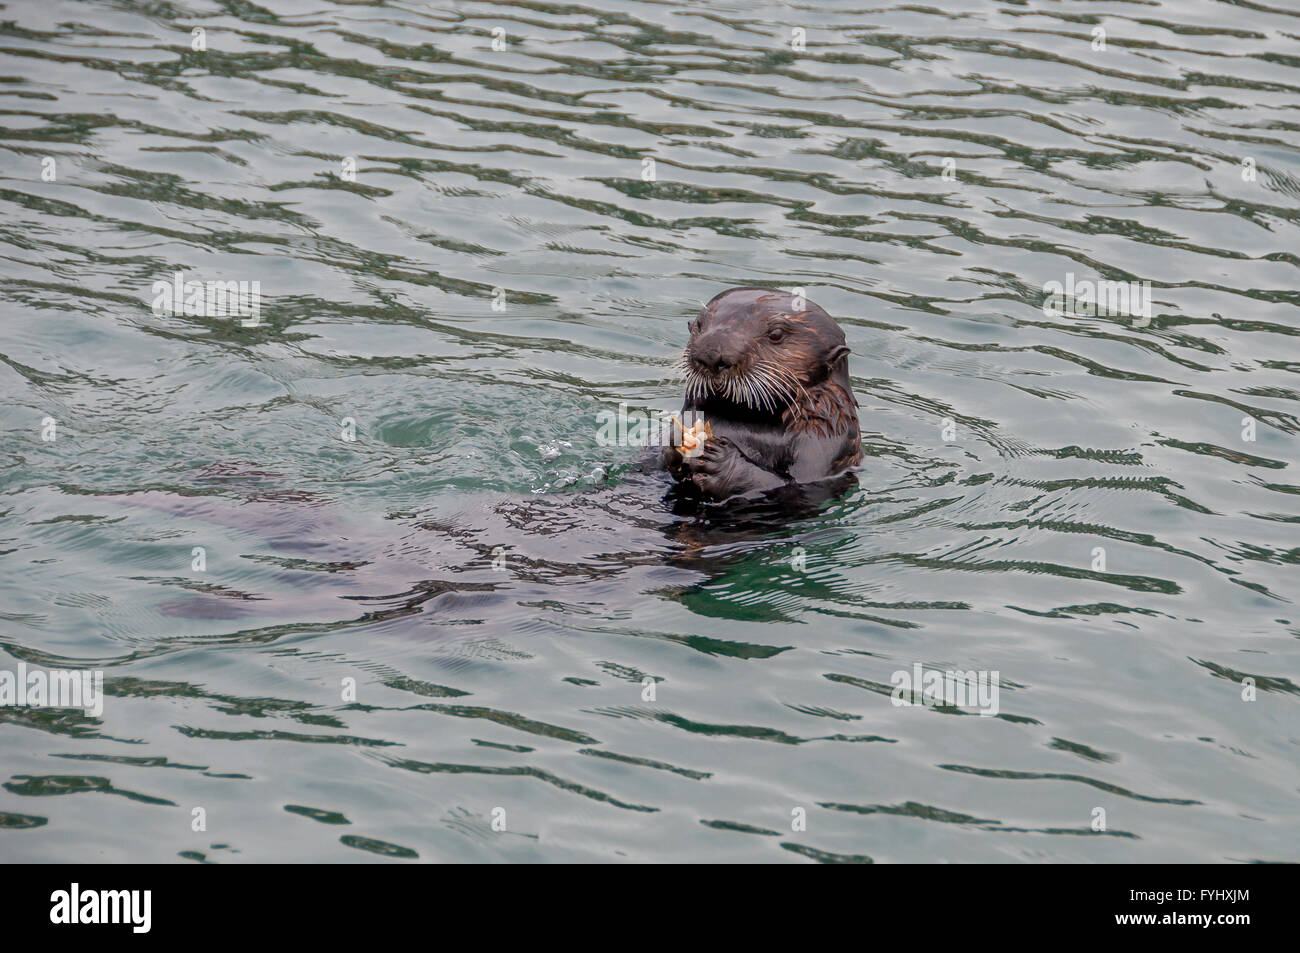 A California sea otter eating crab while floating on back in Morro Bay, California; brown sea otter holds orange crab shell Stock Photo